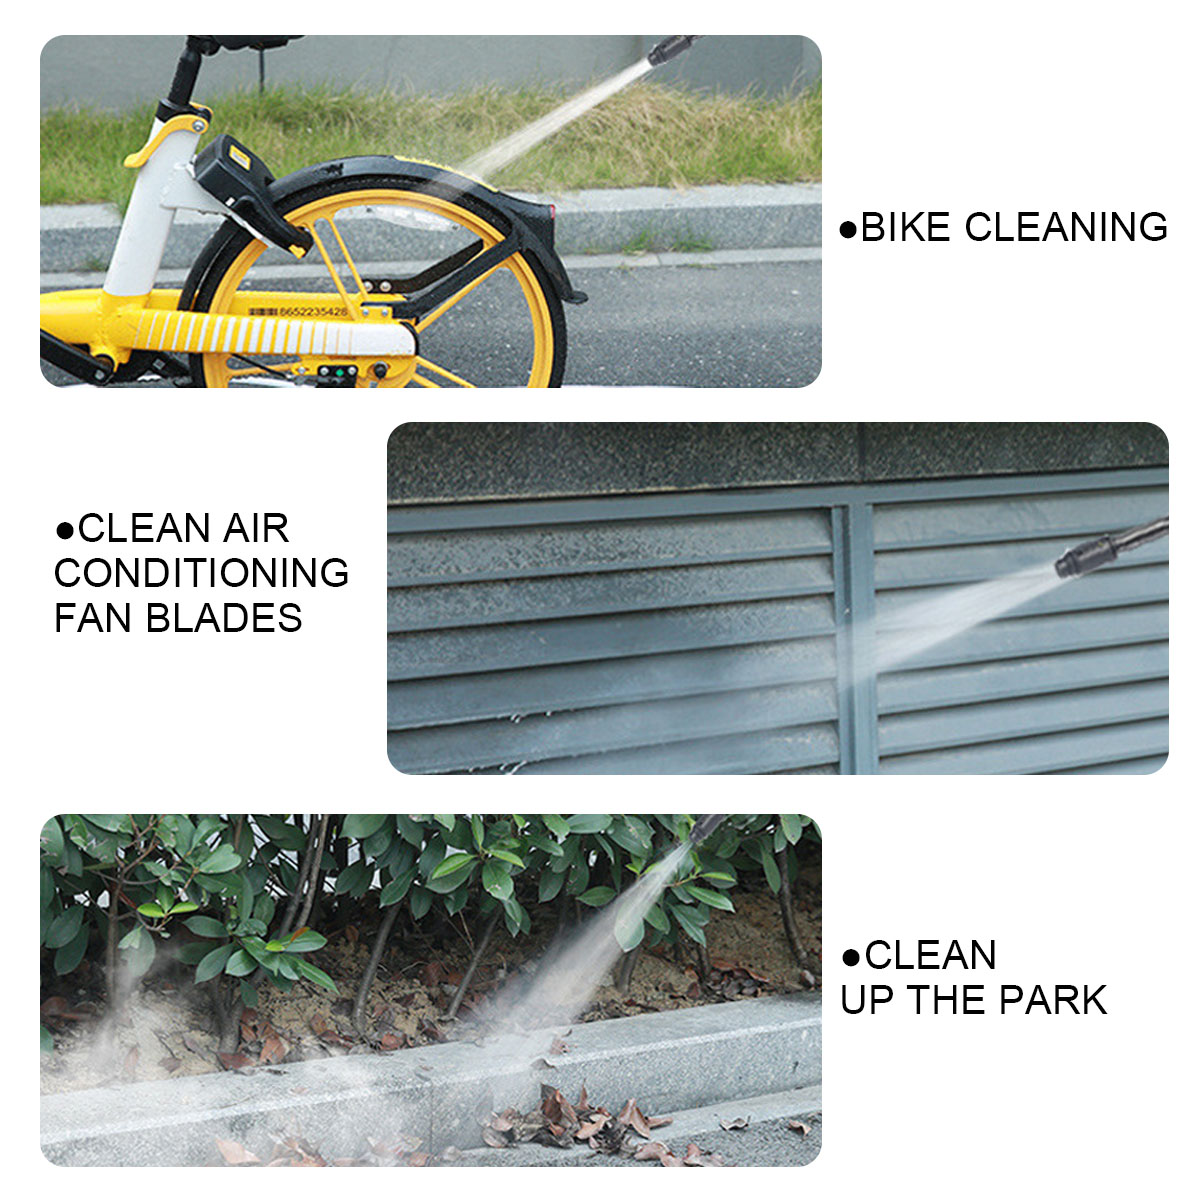 24V-Cordless-Power-Washer-Portable-Li-ion-Battery-Washer-Cleaner-Pressure-Washer-Cleaner-Electric-Pr-1829015-4